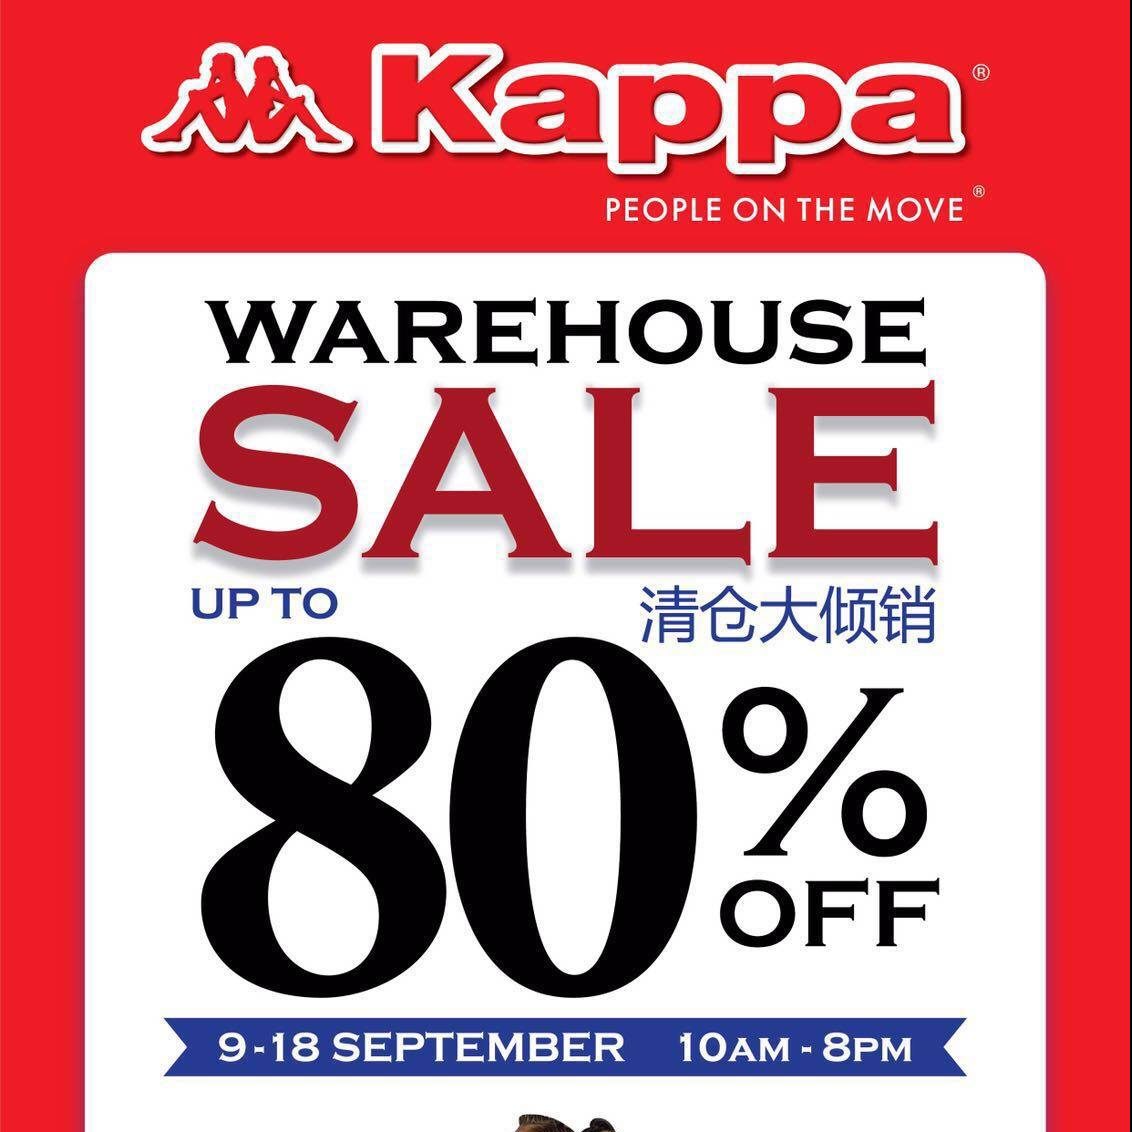 Kappa Singapore Warehouse Sale Up to 80% Off Promotion 9 to 18 Sep 2016